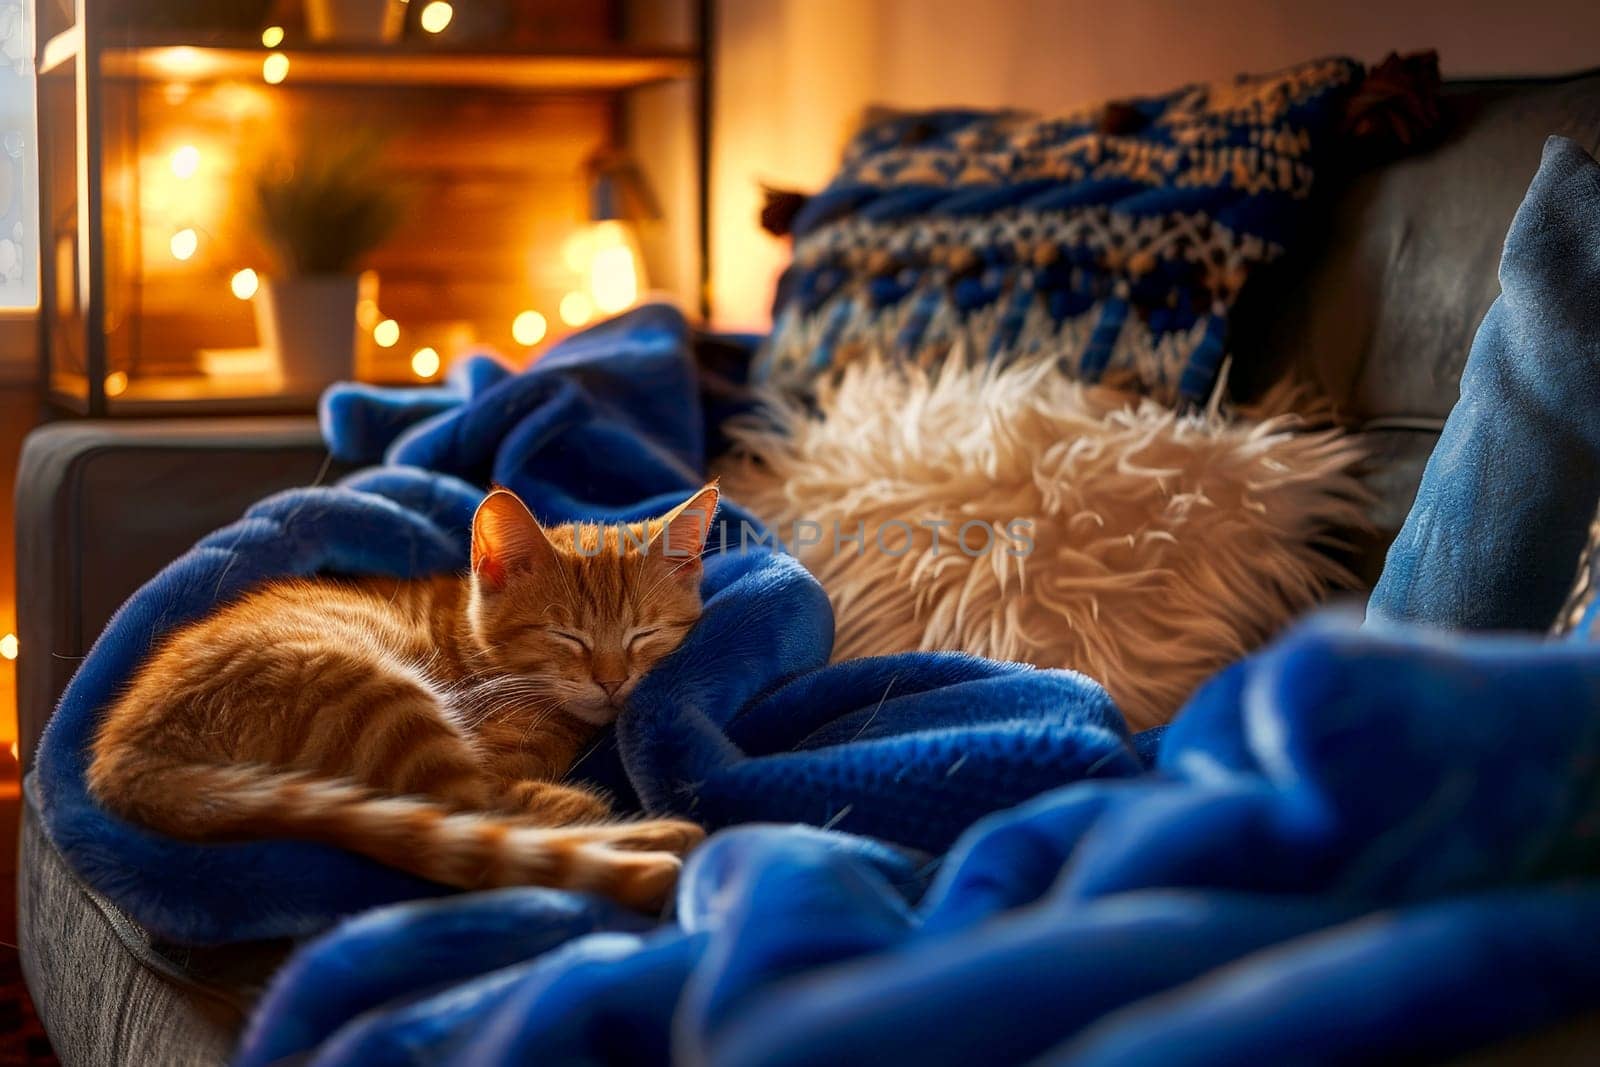 A cat is sleeping on a blue blanket on a couch by matamnad